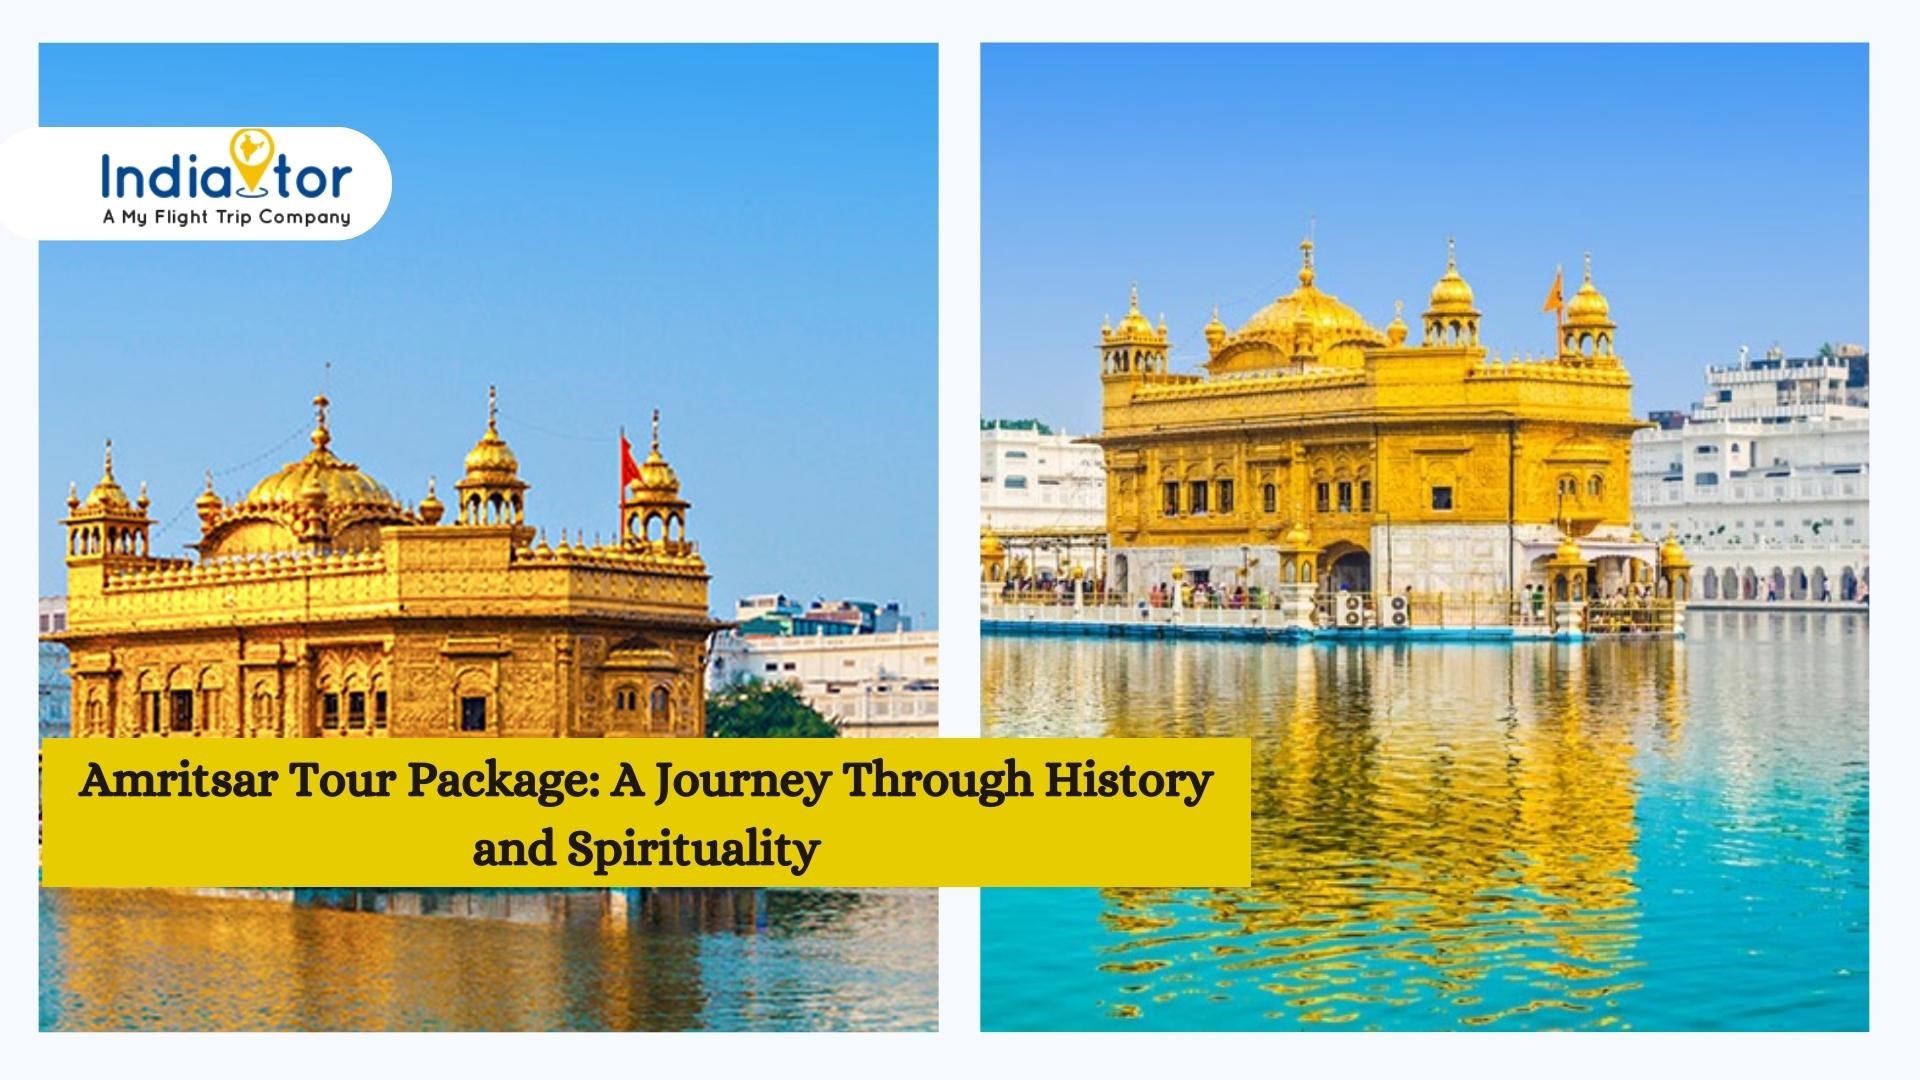 Amritsar Tour Package: A Journey Through History and Spirituality